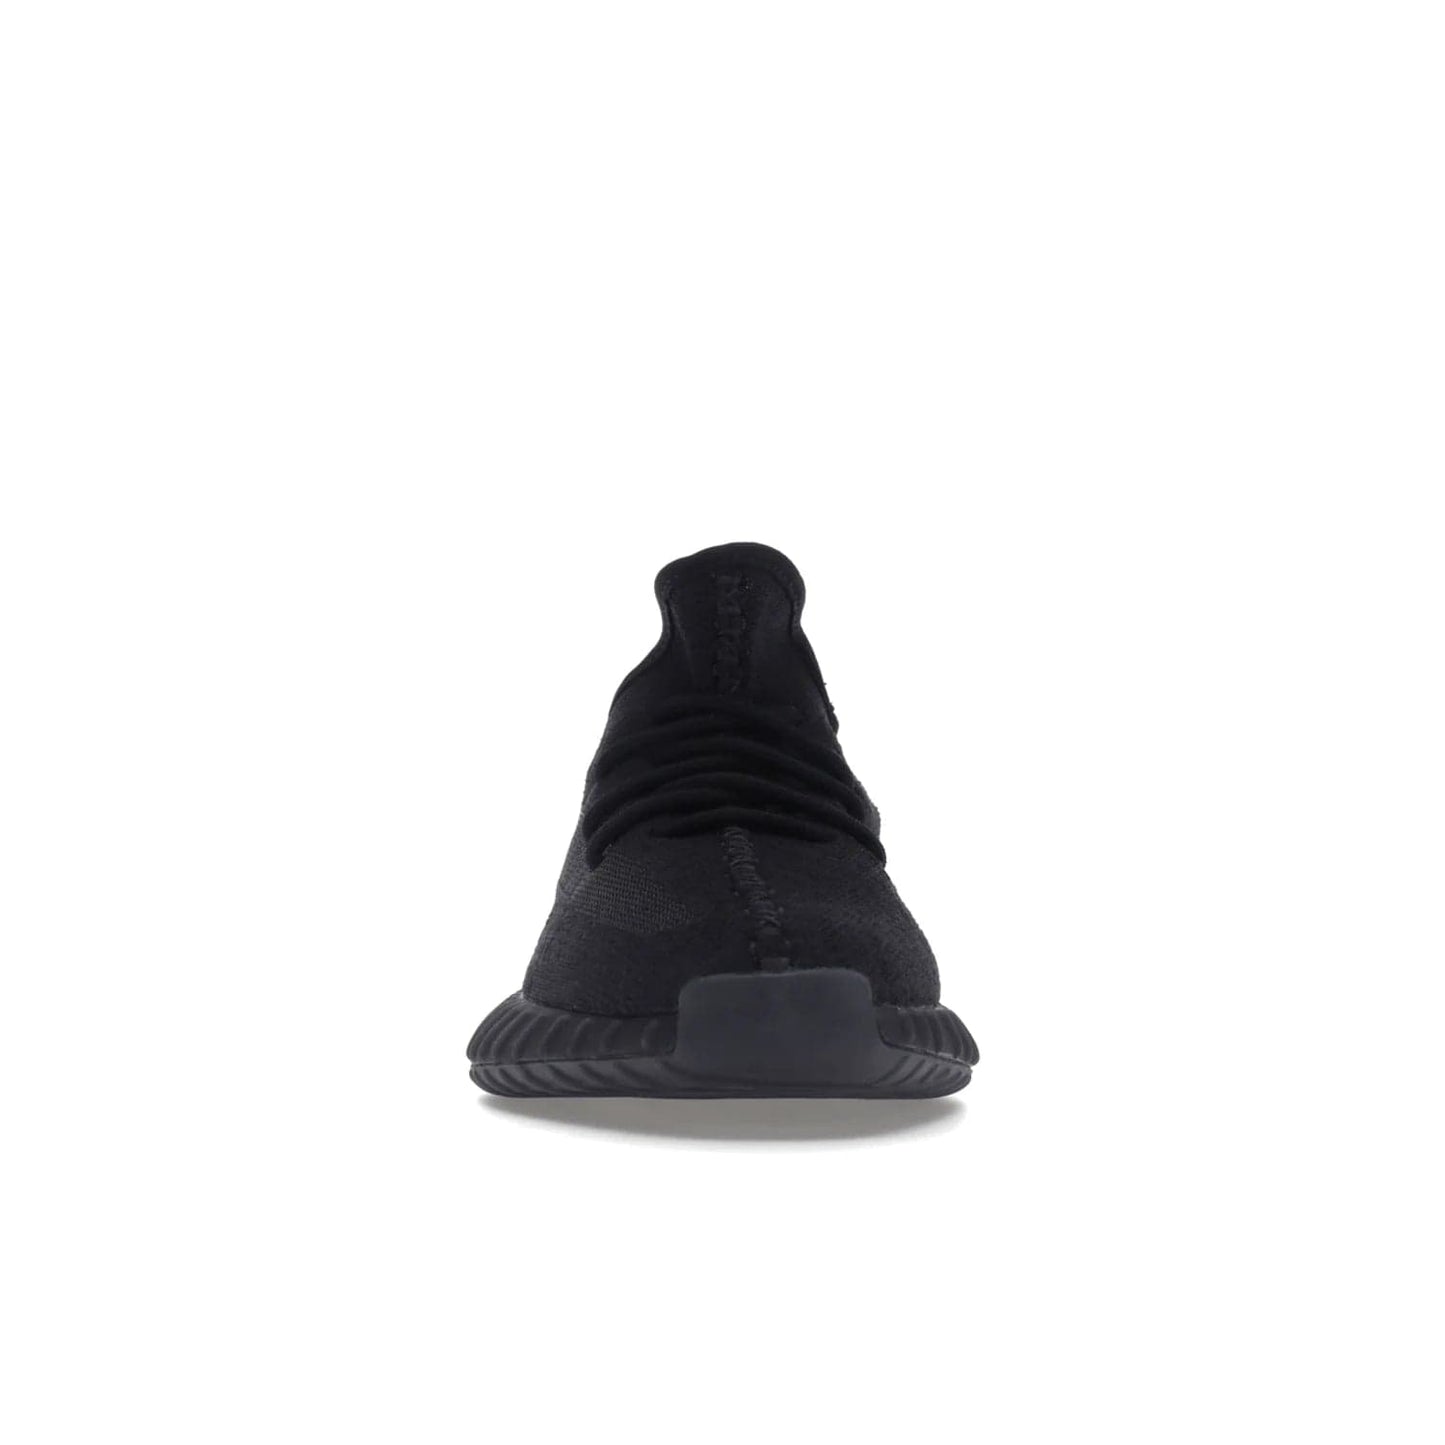 adidas Yeezy Boost 350 V2 Onyx - Image 10 - Only at www.BallersClubKickz.com - Adidas Yeezy Boost 350 V2 Onyx Triple Black shoes for comfort and style. Arriving Spring 2022.